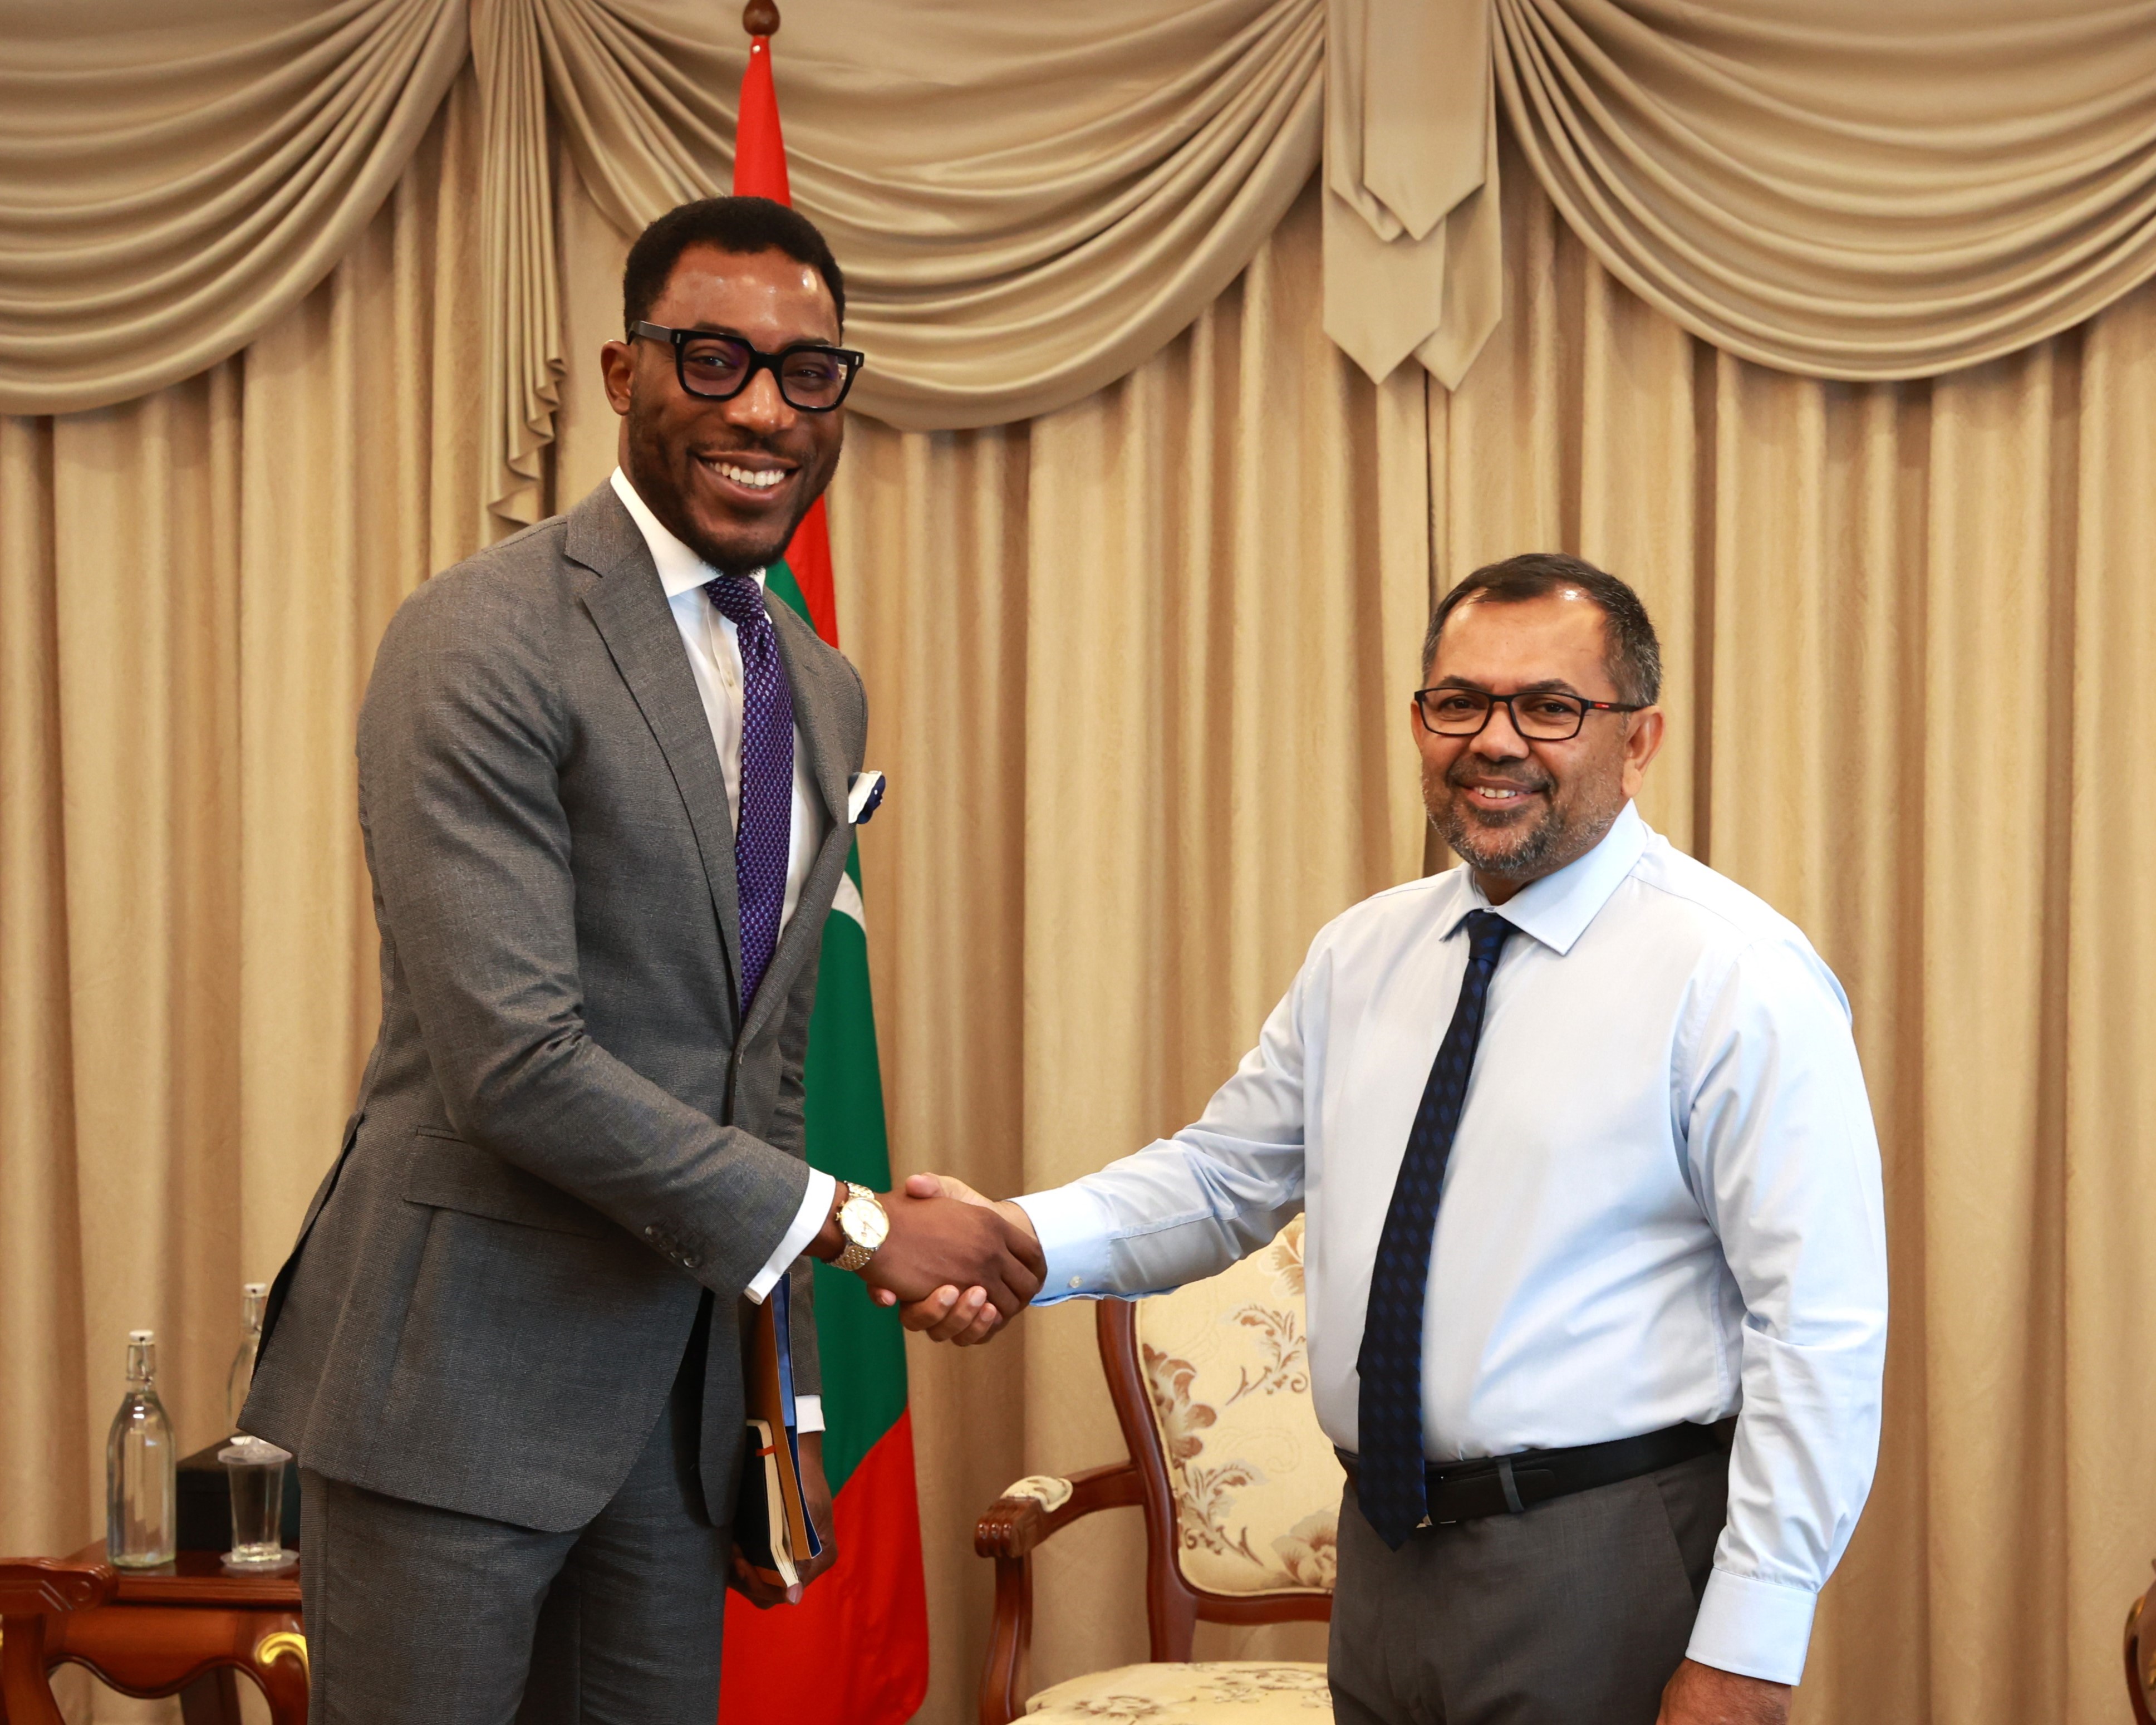 UNFPA Maldives Country Director, Mr. Kunle Adeniyi with the Honourable Minister of Foreign Affairs, Mr. Moosa Zameer. © Ministry of Foreign Affairs